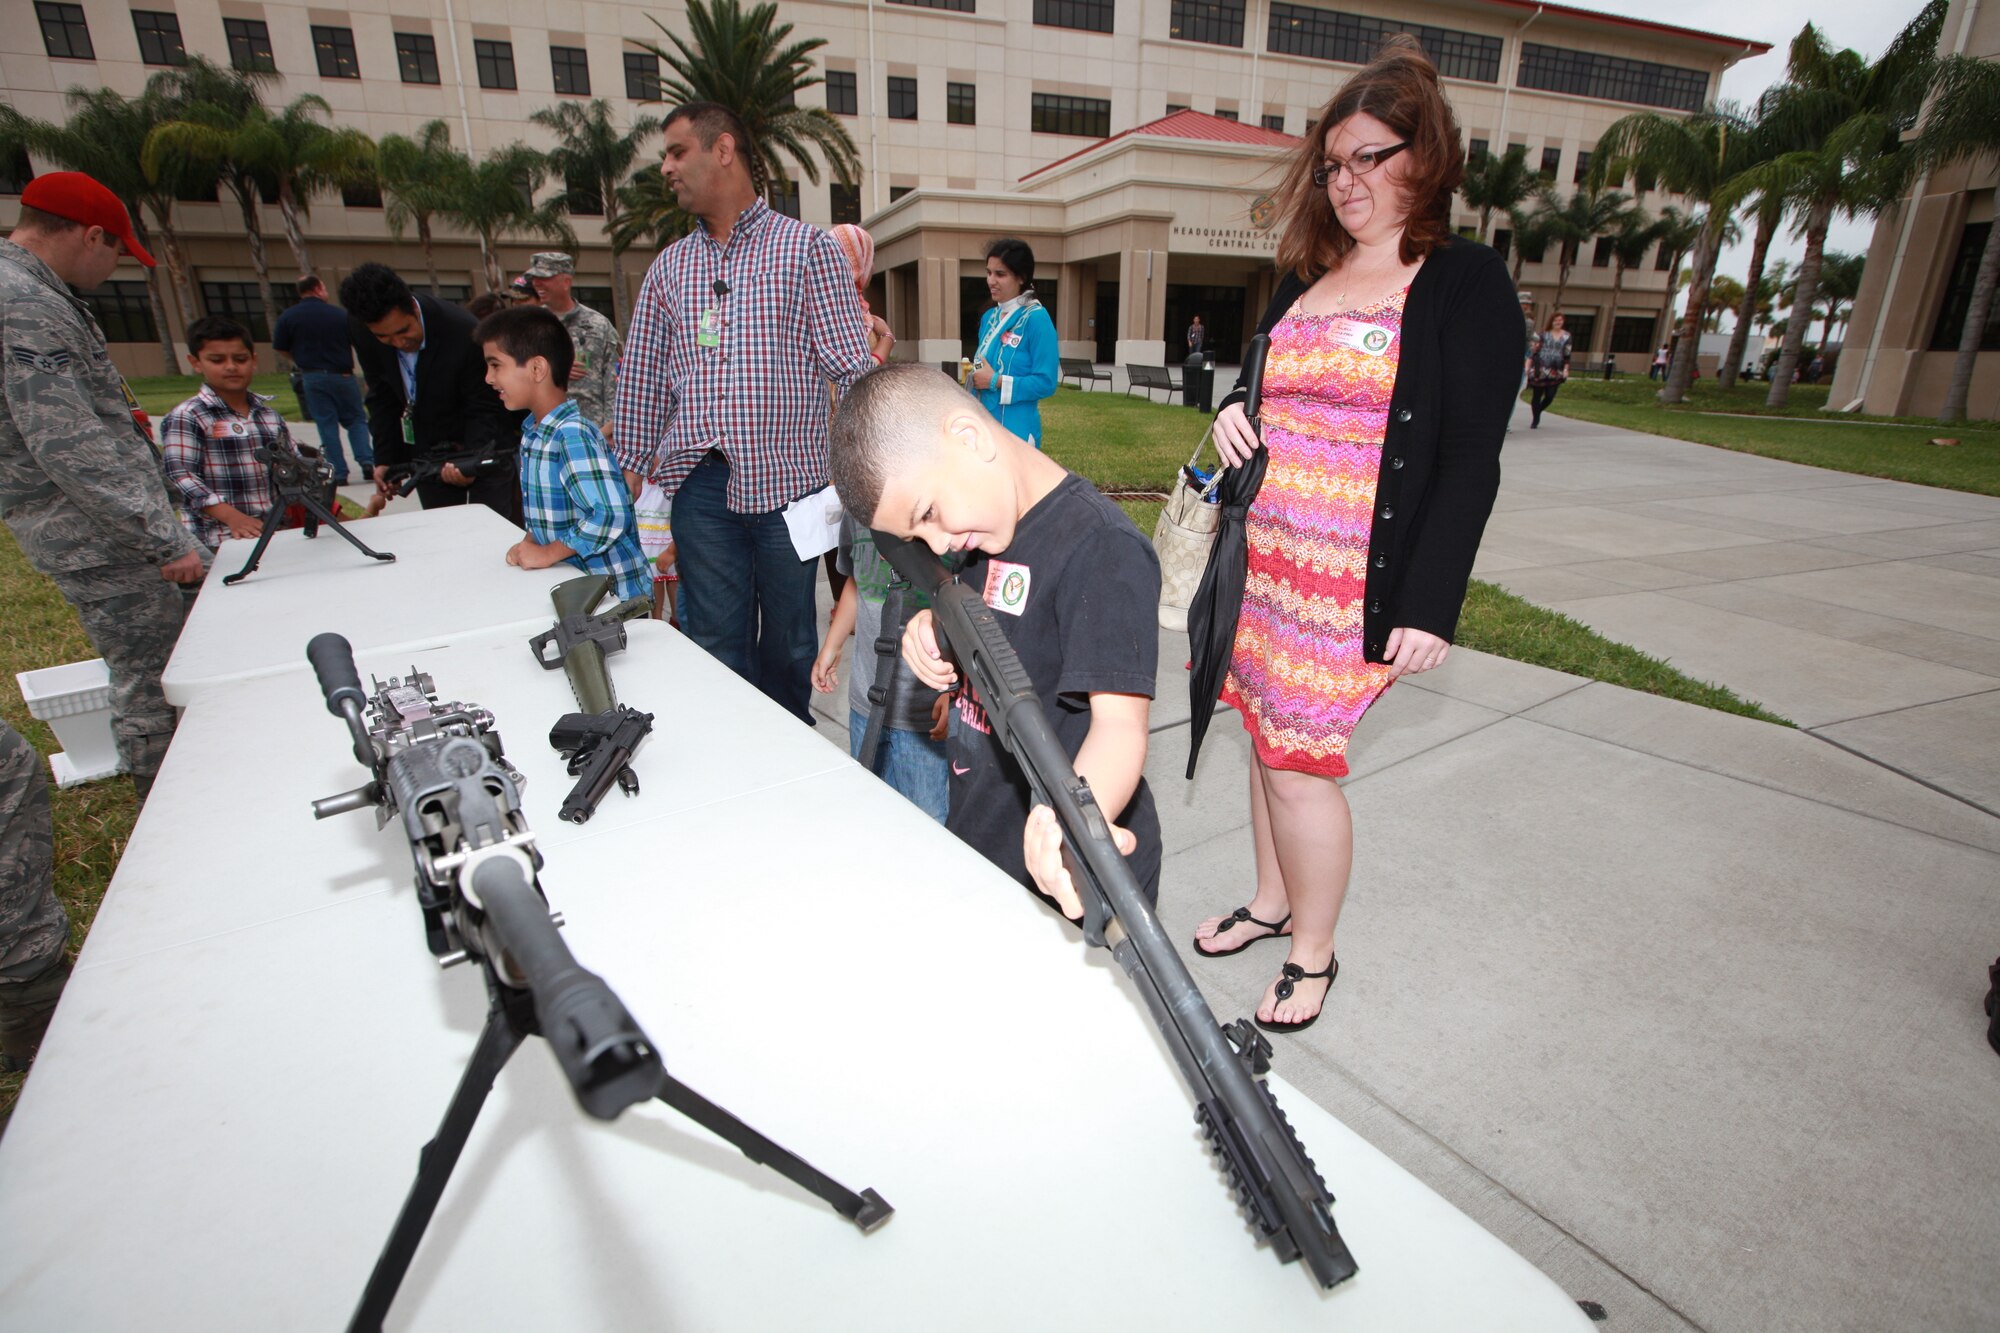 Trent, son of Sgt. Fredrick J. Coleman, U.S. Central Command public affairs, takes aim with a shotgun as his mother Jewell, wife of Sgt. Coleman, looks on at the small arms display during USCENTCOM’s Family Open House at MacDill Air Force Base, Fla., April 18.  (U.S. Marine Corps photo by Sgt. Fredrick J. Coleman/Released)